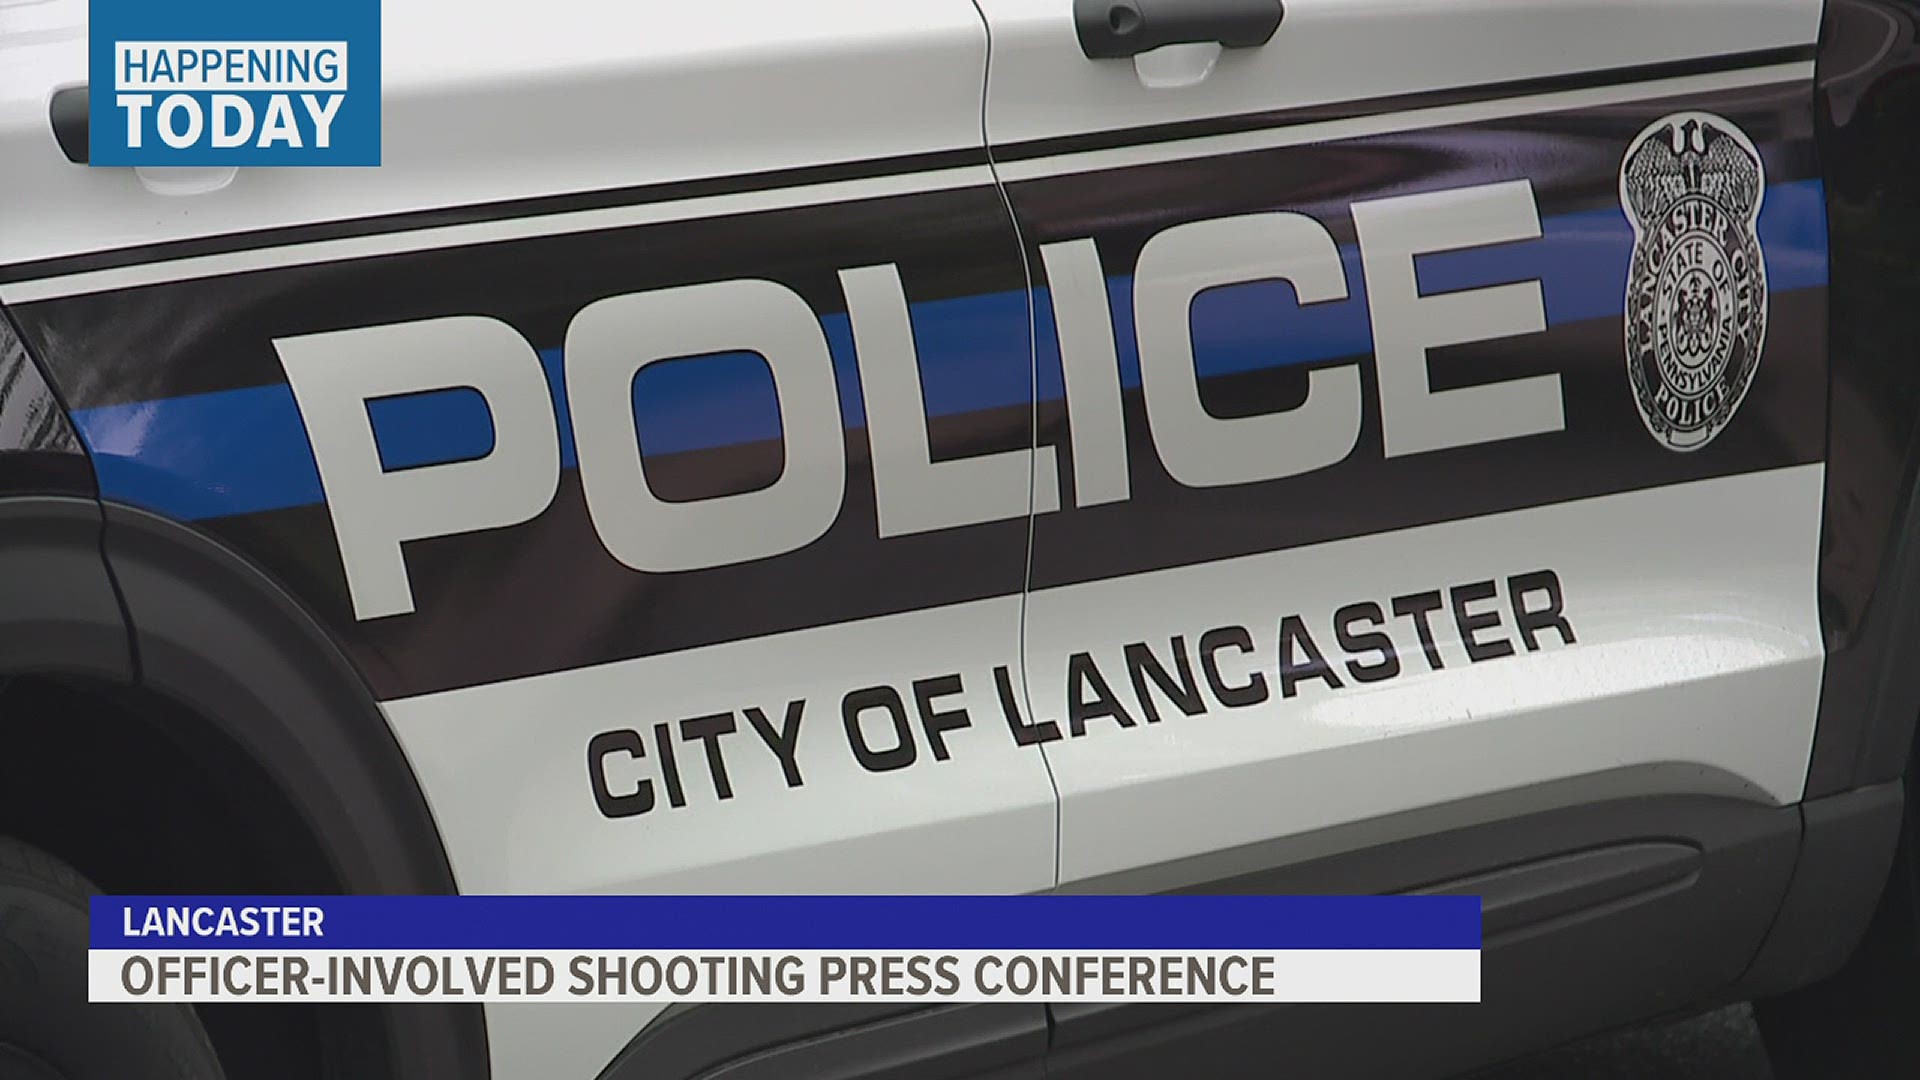 Officer Involved Shooting Press Conference in Lancaster